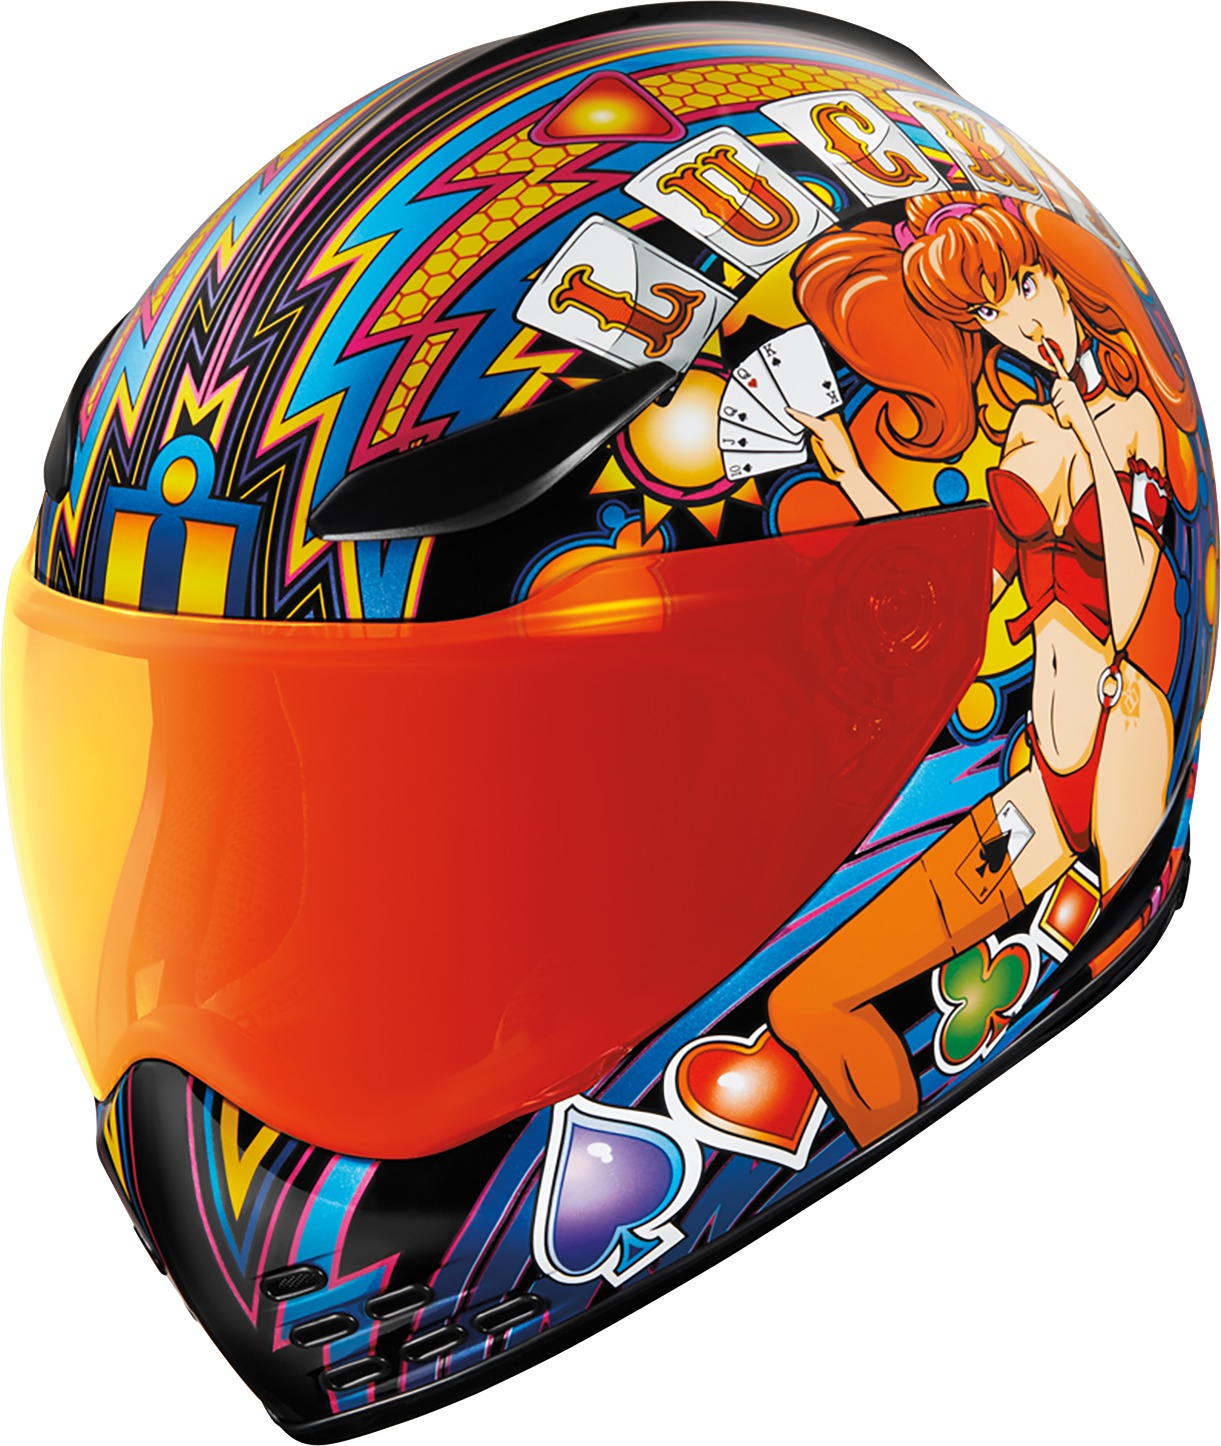 Domain Lucky Lid 4 Helmet Red Medium - Click Image to Close